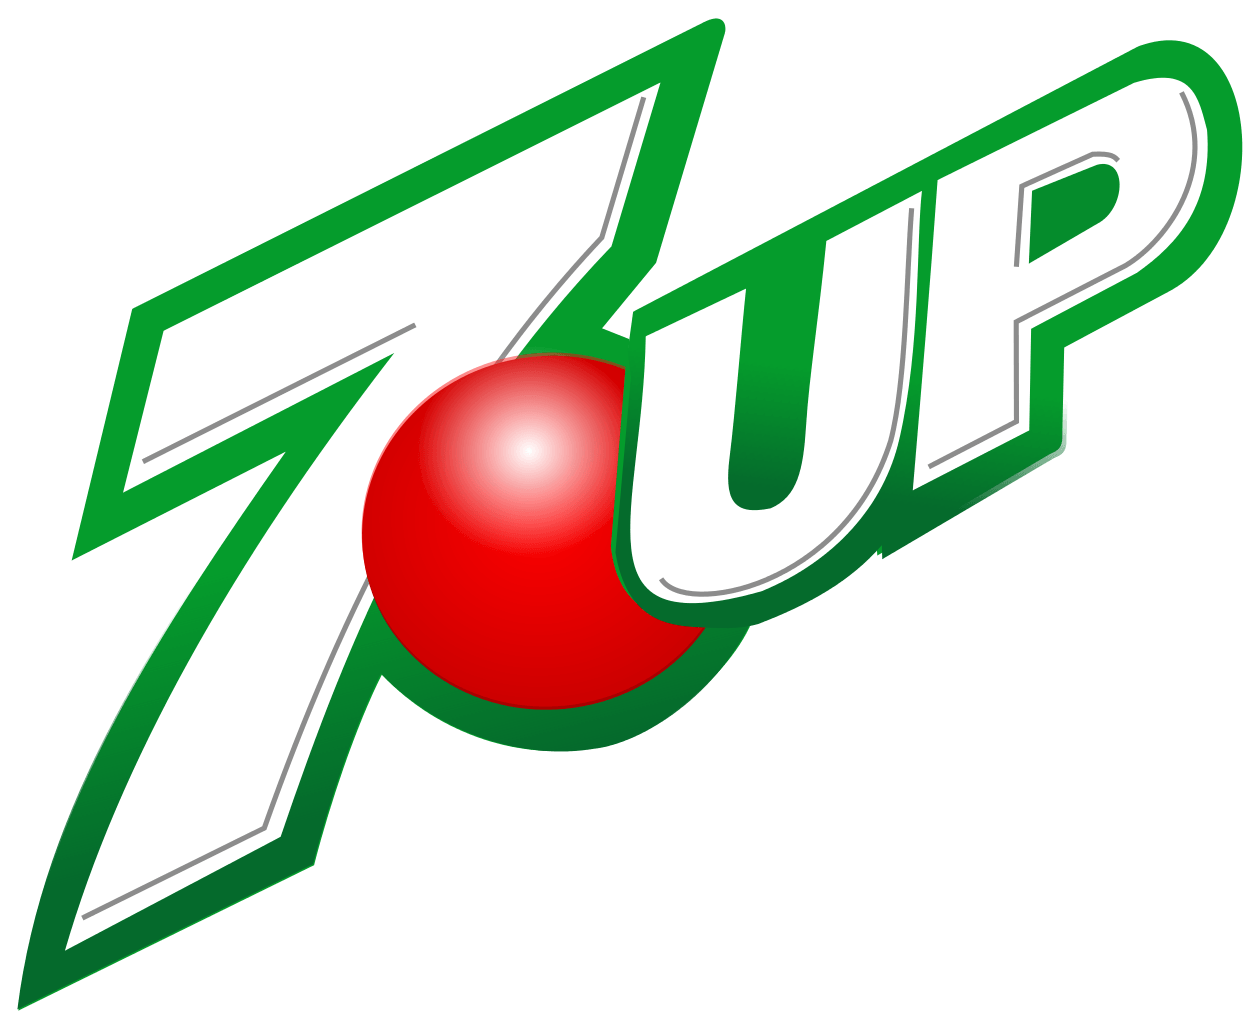 7 Up Logo - What went wrong with 7 Up? Everything. - Stealing Share